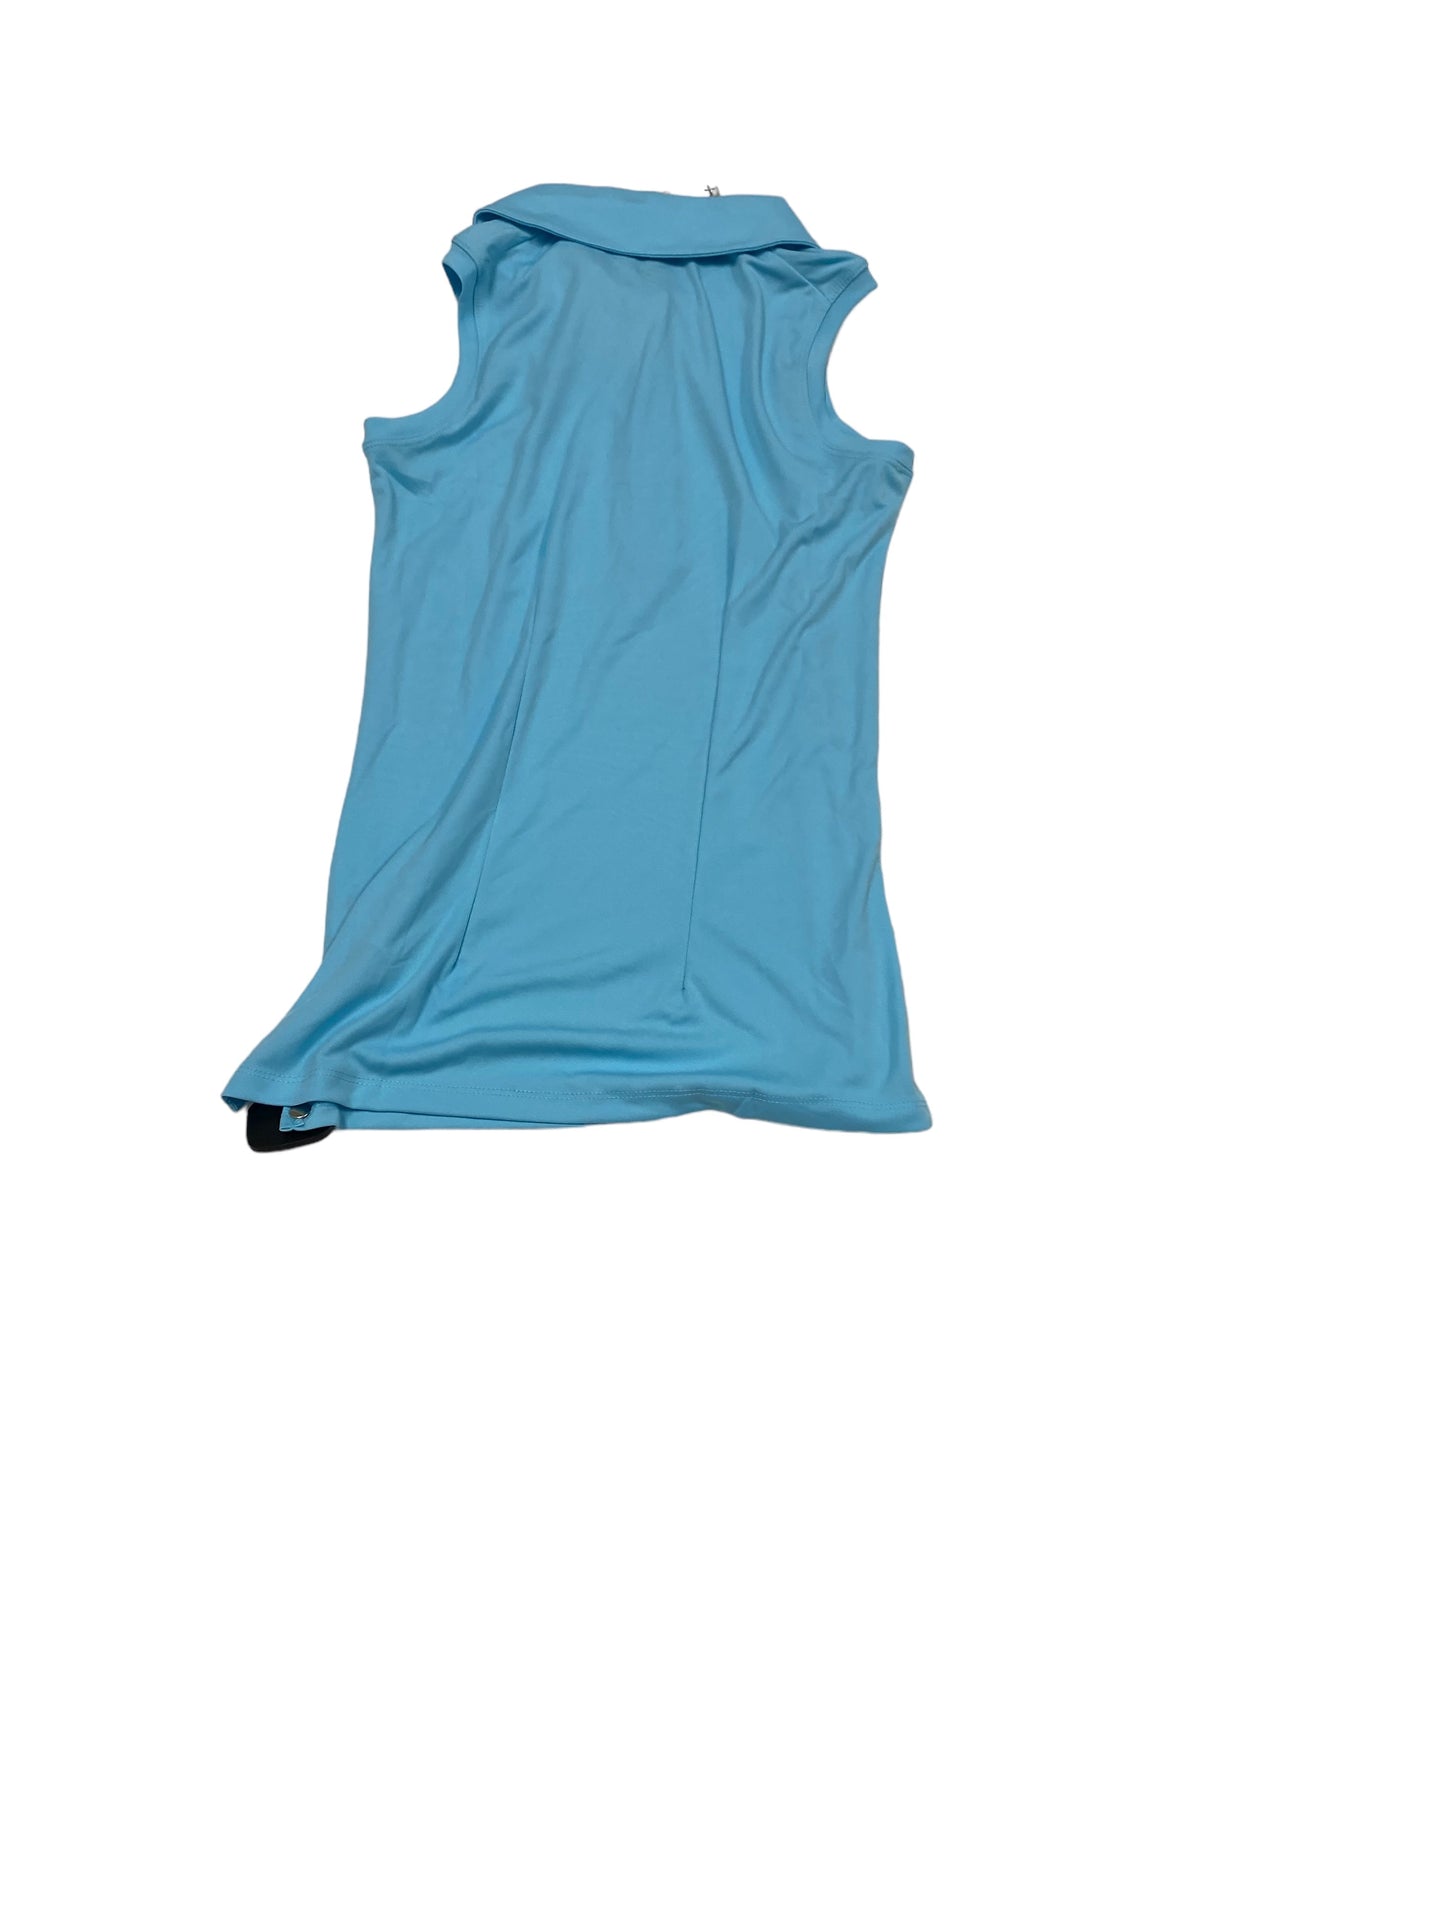 Blue Athletic Tank Top Cmc, Size S